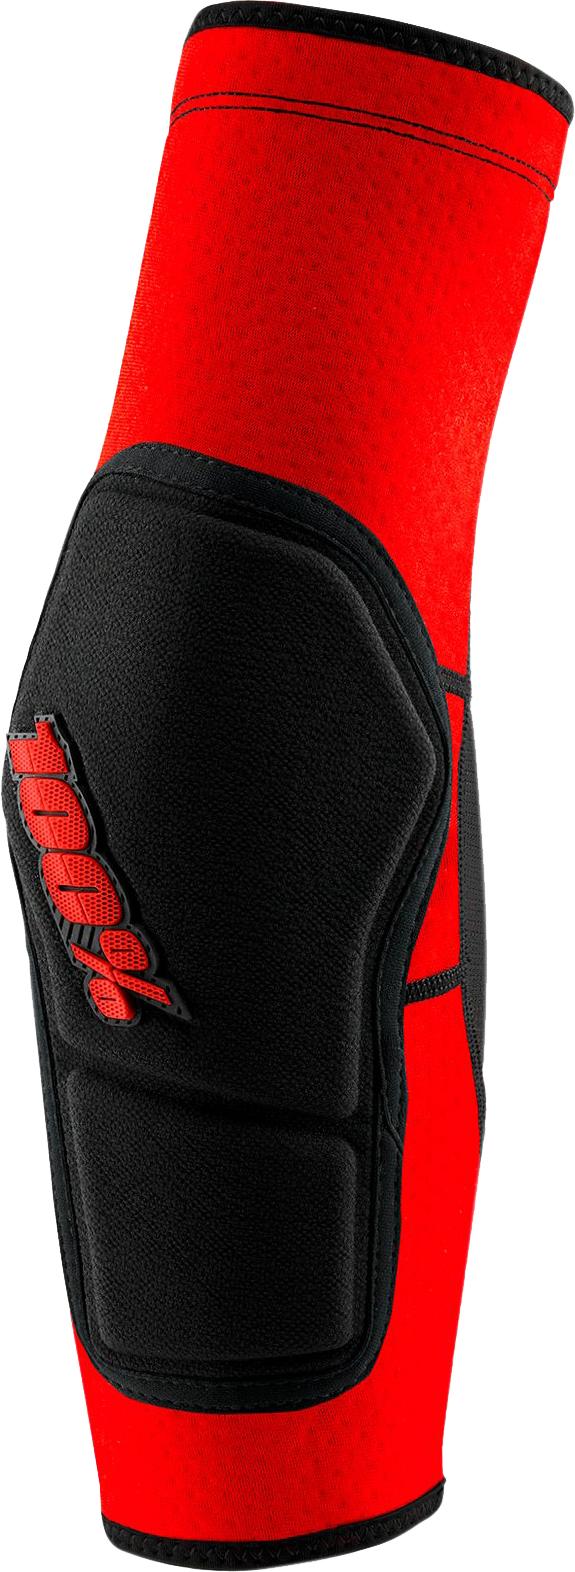 100% Ridecamp Elbow Guard - Red/black